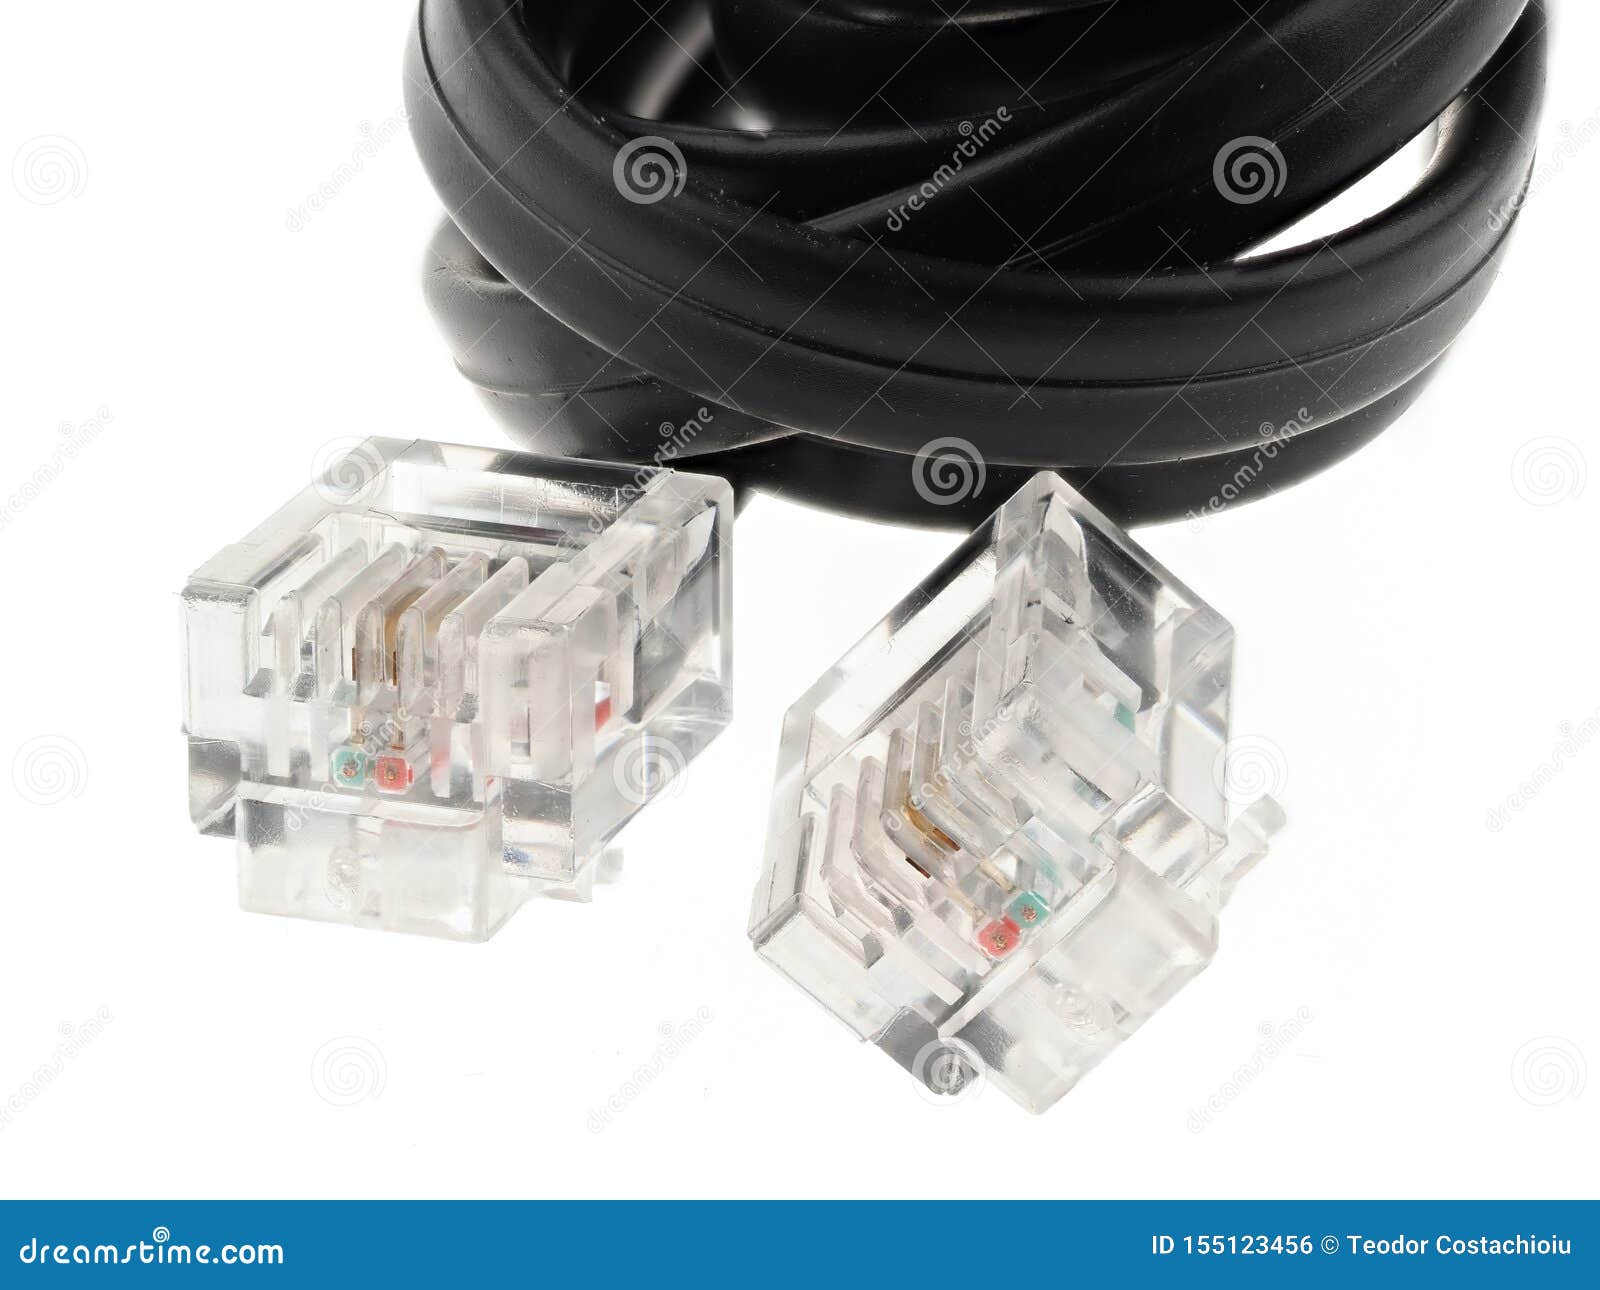 black telephone cable with rj11 connectors